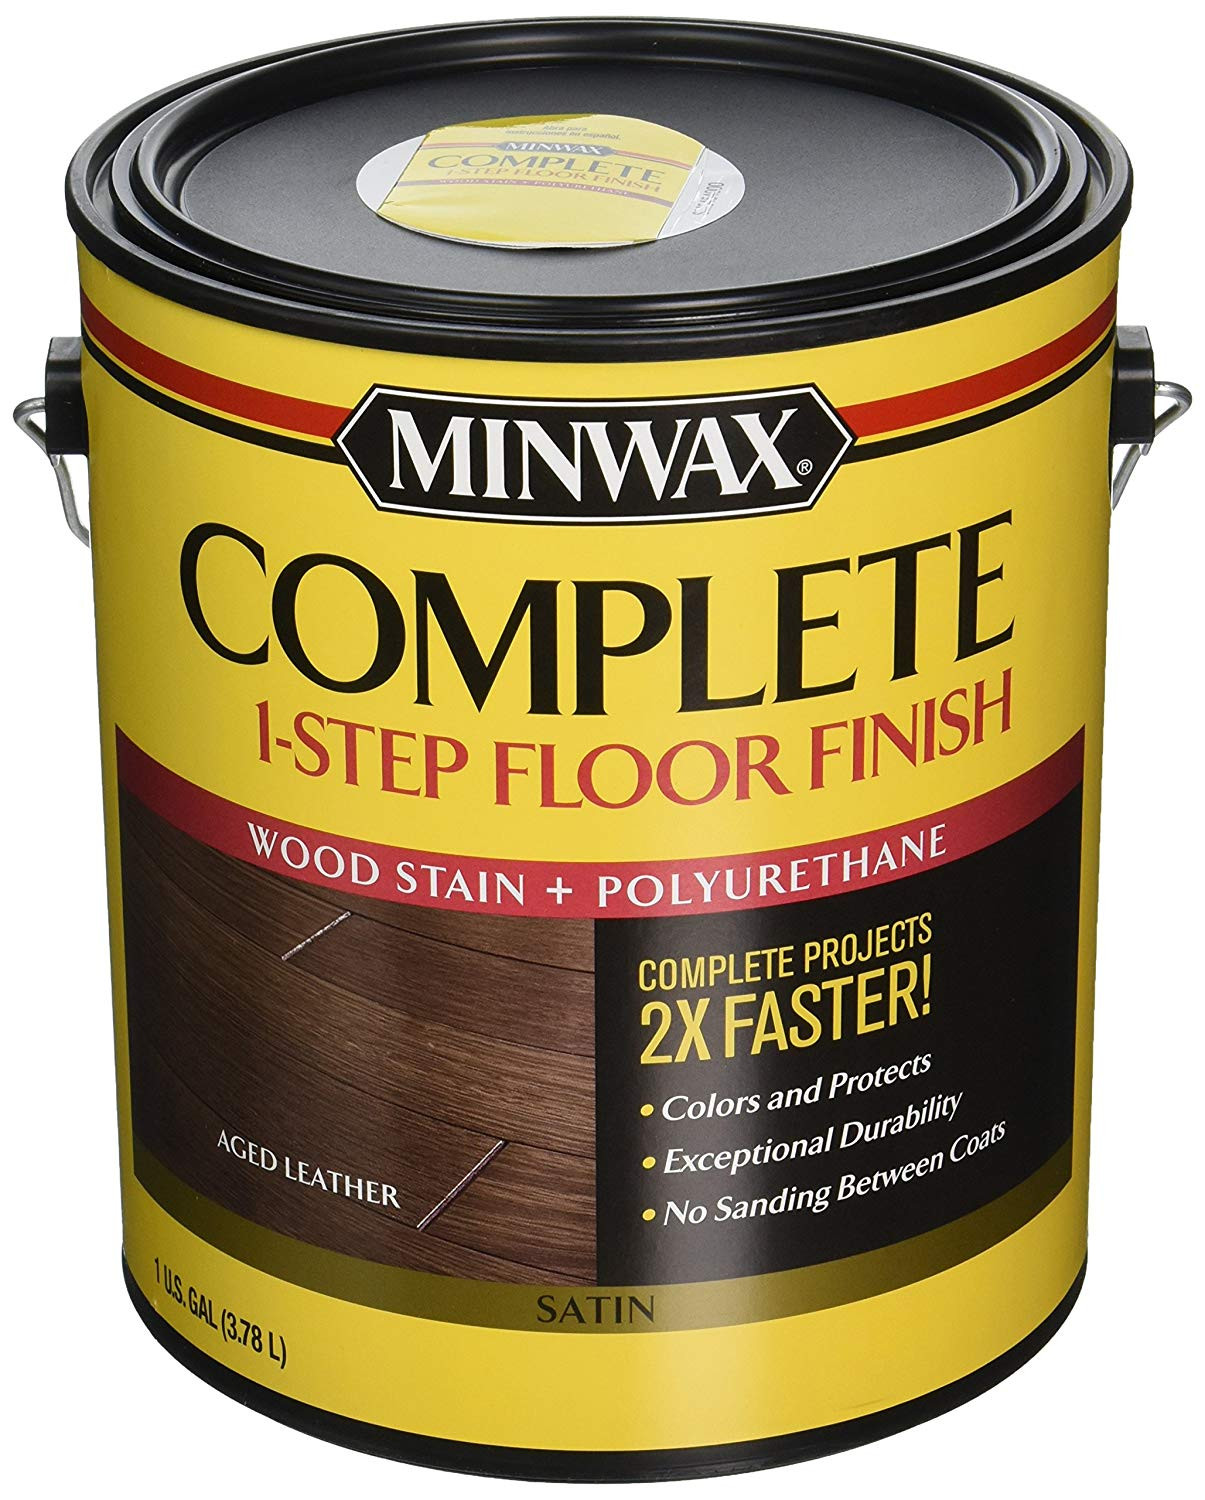 26 attractive Pg Model Hardwood Flooring Reviews 2024 free download pg model hardwood flooring reviews of minwax 672050000 67205 1g satin aged leather complete 1 step floor for minwax 672050000 67205 1g satin aged leather complete 1 step floor finish amazon 